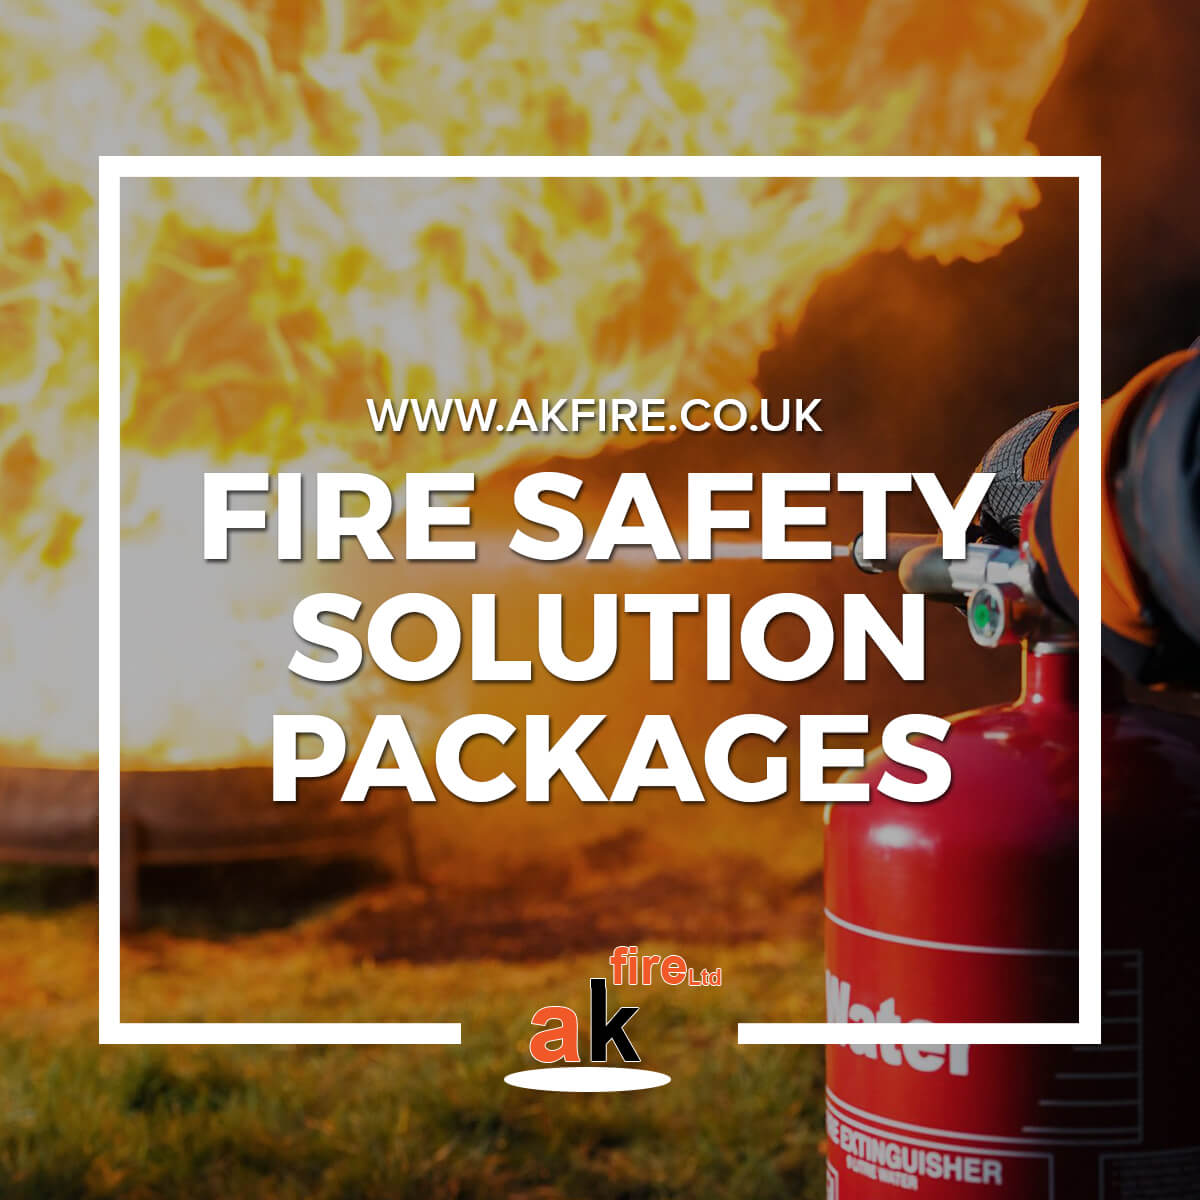 AK Fire Offers great fire protection packages for all fire safety requirements.